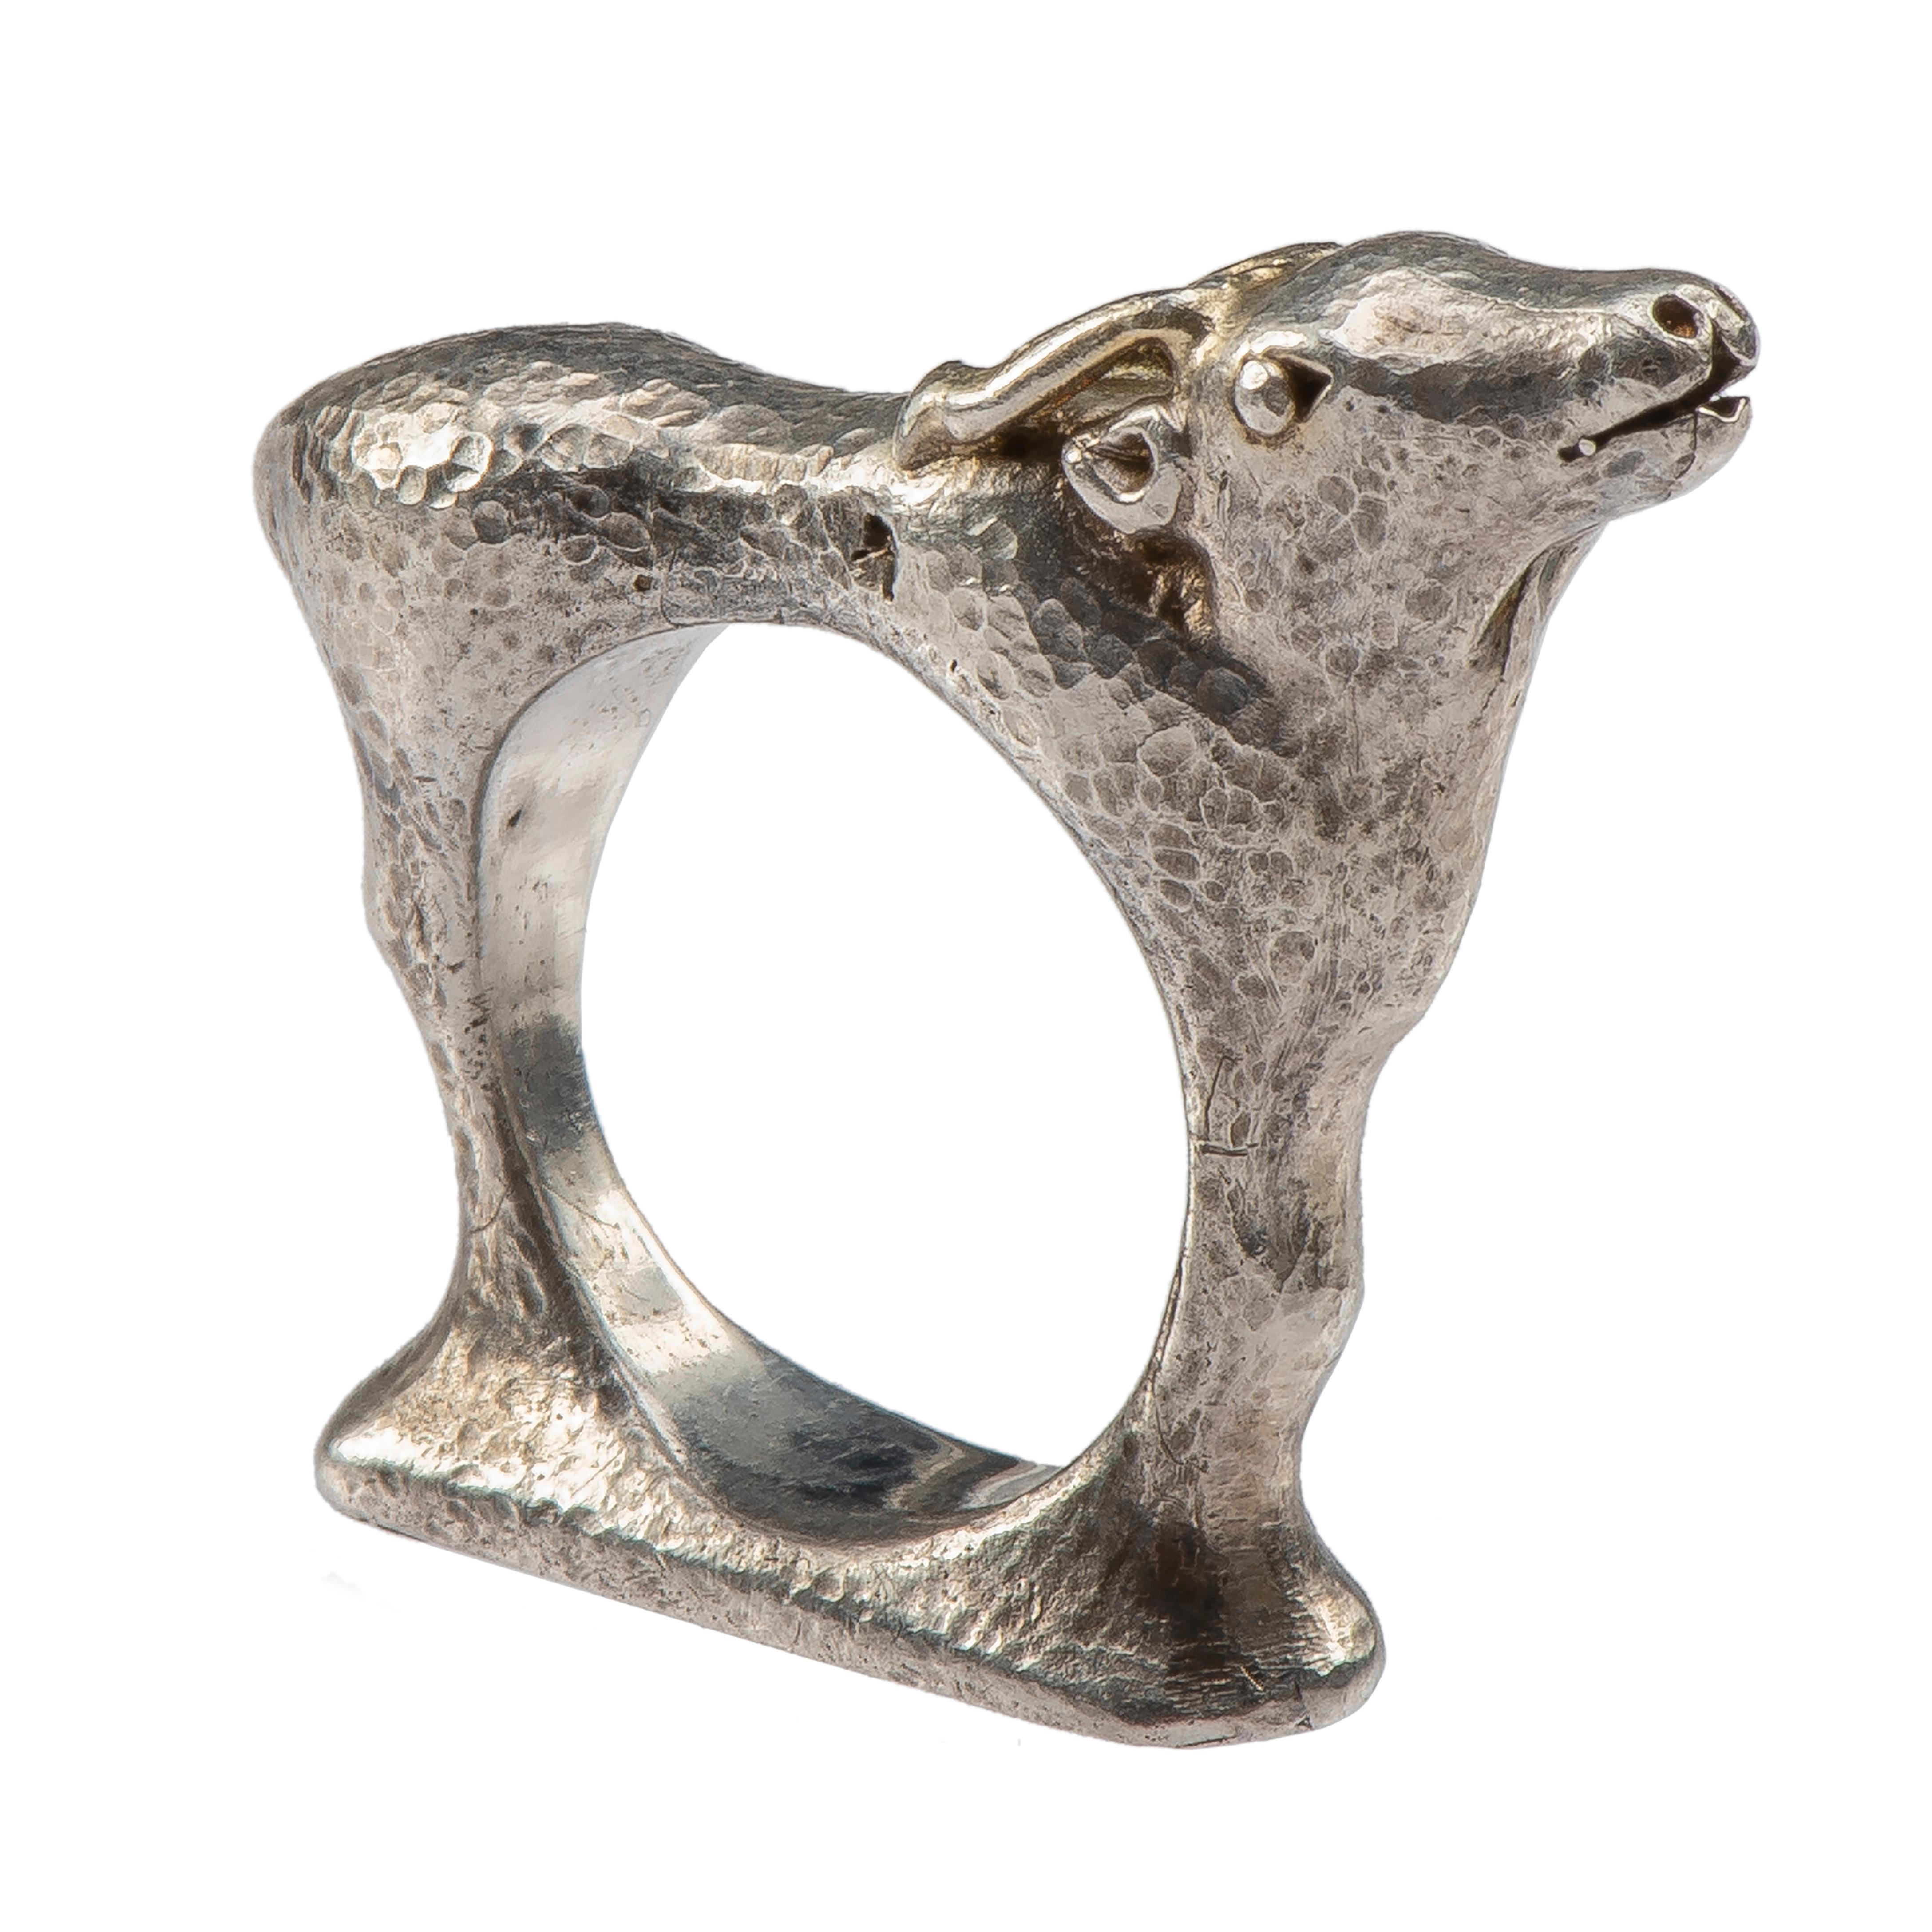 Mosheh Oved Stag ring 
England, c. 1940 
Silver, gold 
Weight 20.4 gr.; Circumference 53.16 mm.; US size 6 1/2; UK size N; At widest point 33.8 mm long 

The heavy silver ring is modelled in the form of a young stag standing on a base with a round